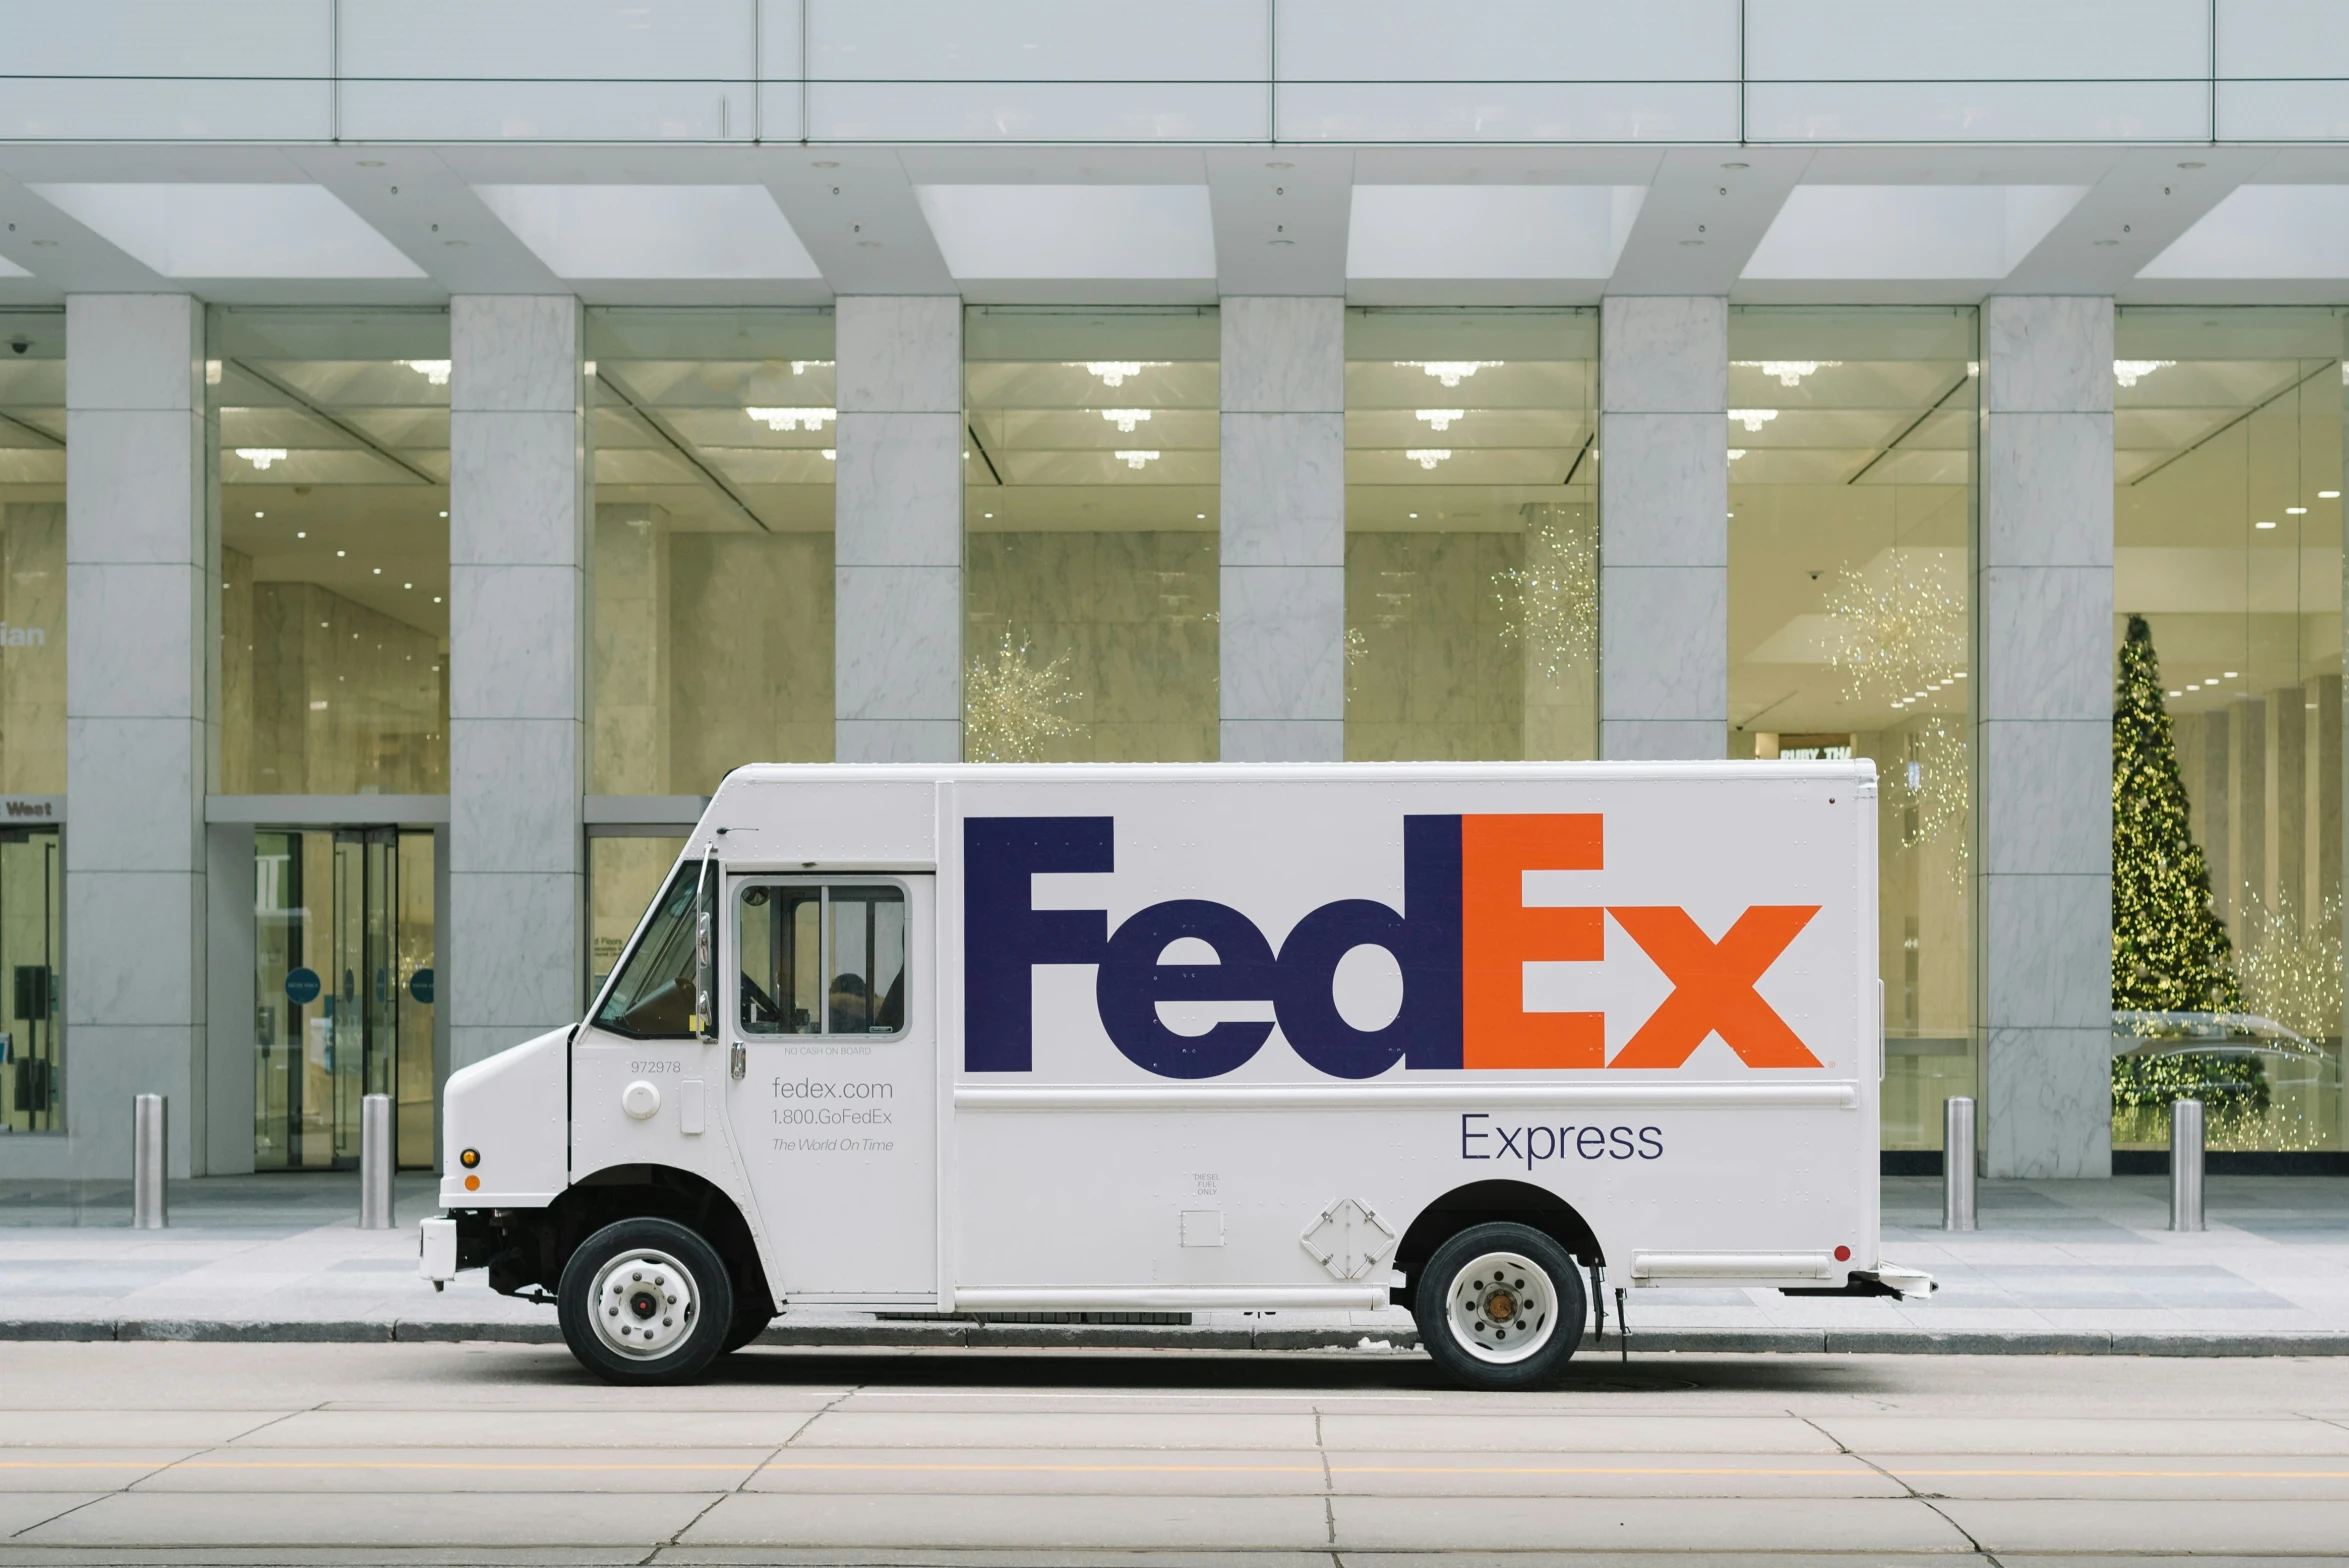 the fedex truck is parked outside of the building